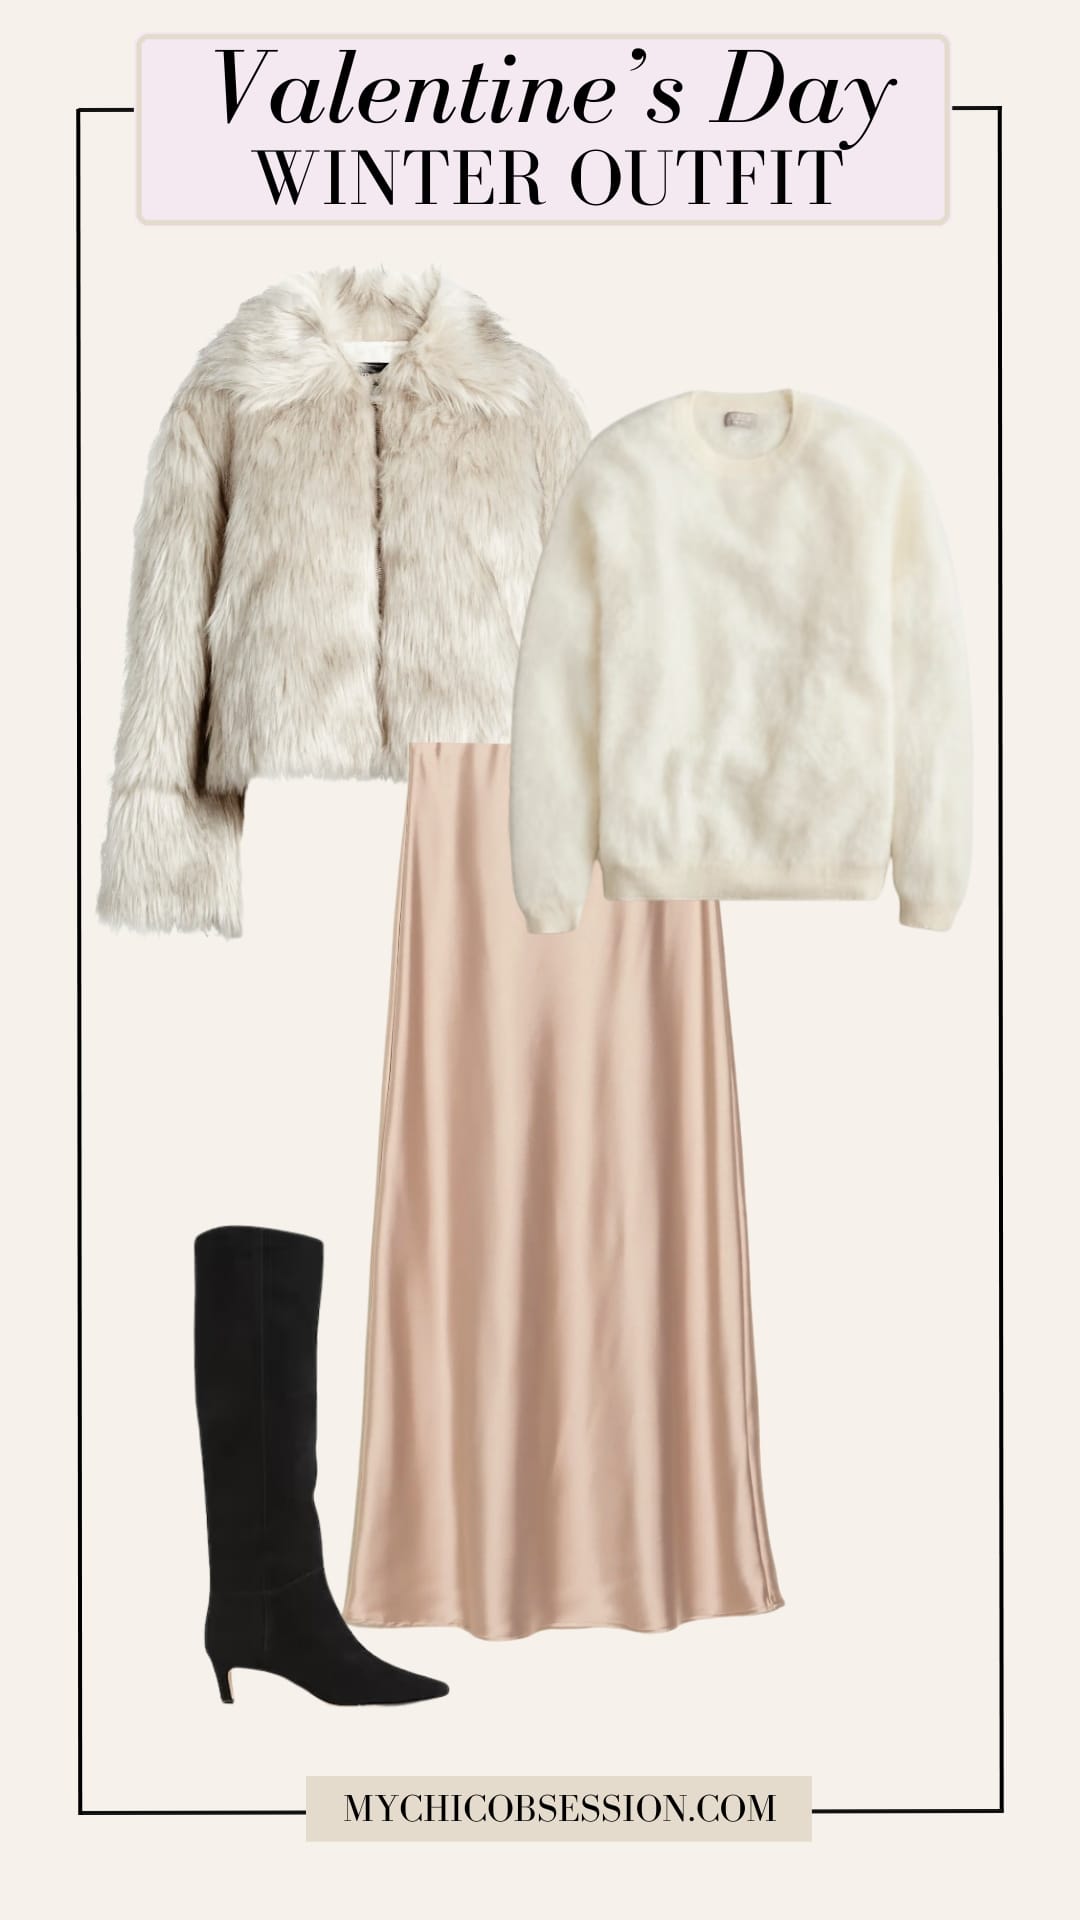 valentine's day winter outfit idea